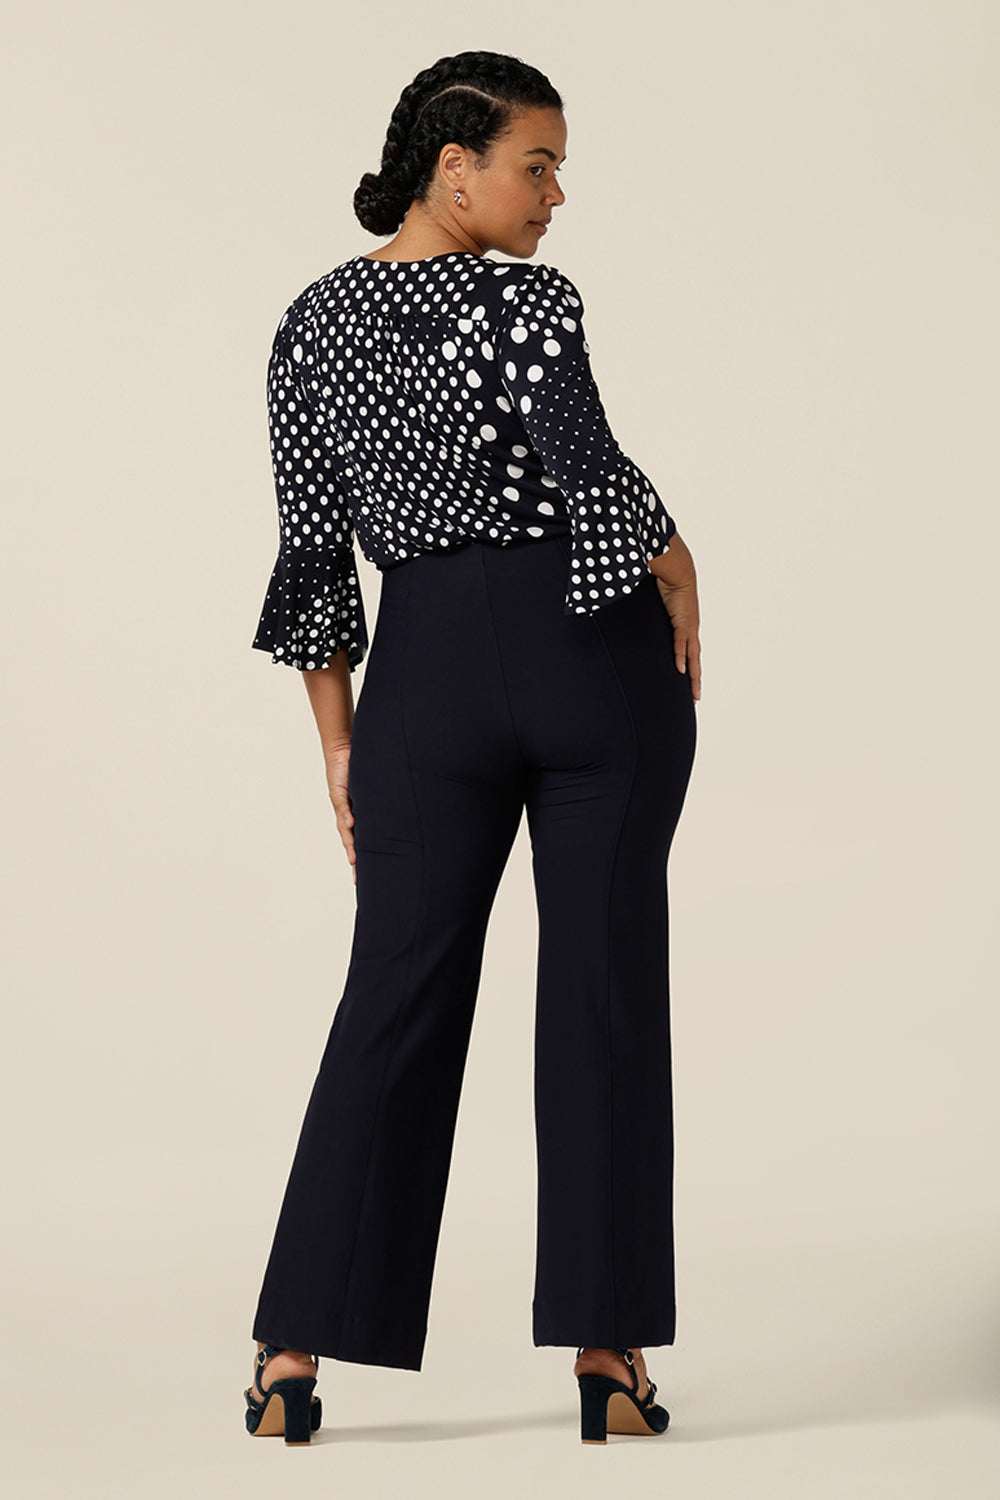 Good for workwear or evening wear pants, these navy trouser by Australia and New Zealand women's fashion label, L&F feature full-length, boot-cut flared legs. Worn with a navy and white print top for elegant corporate style. 